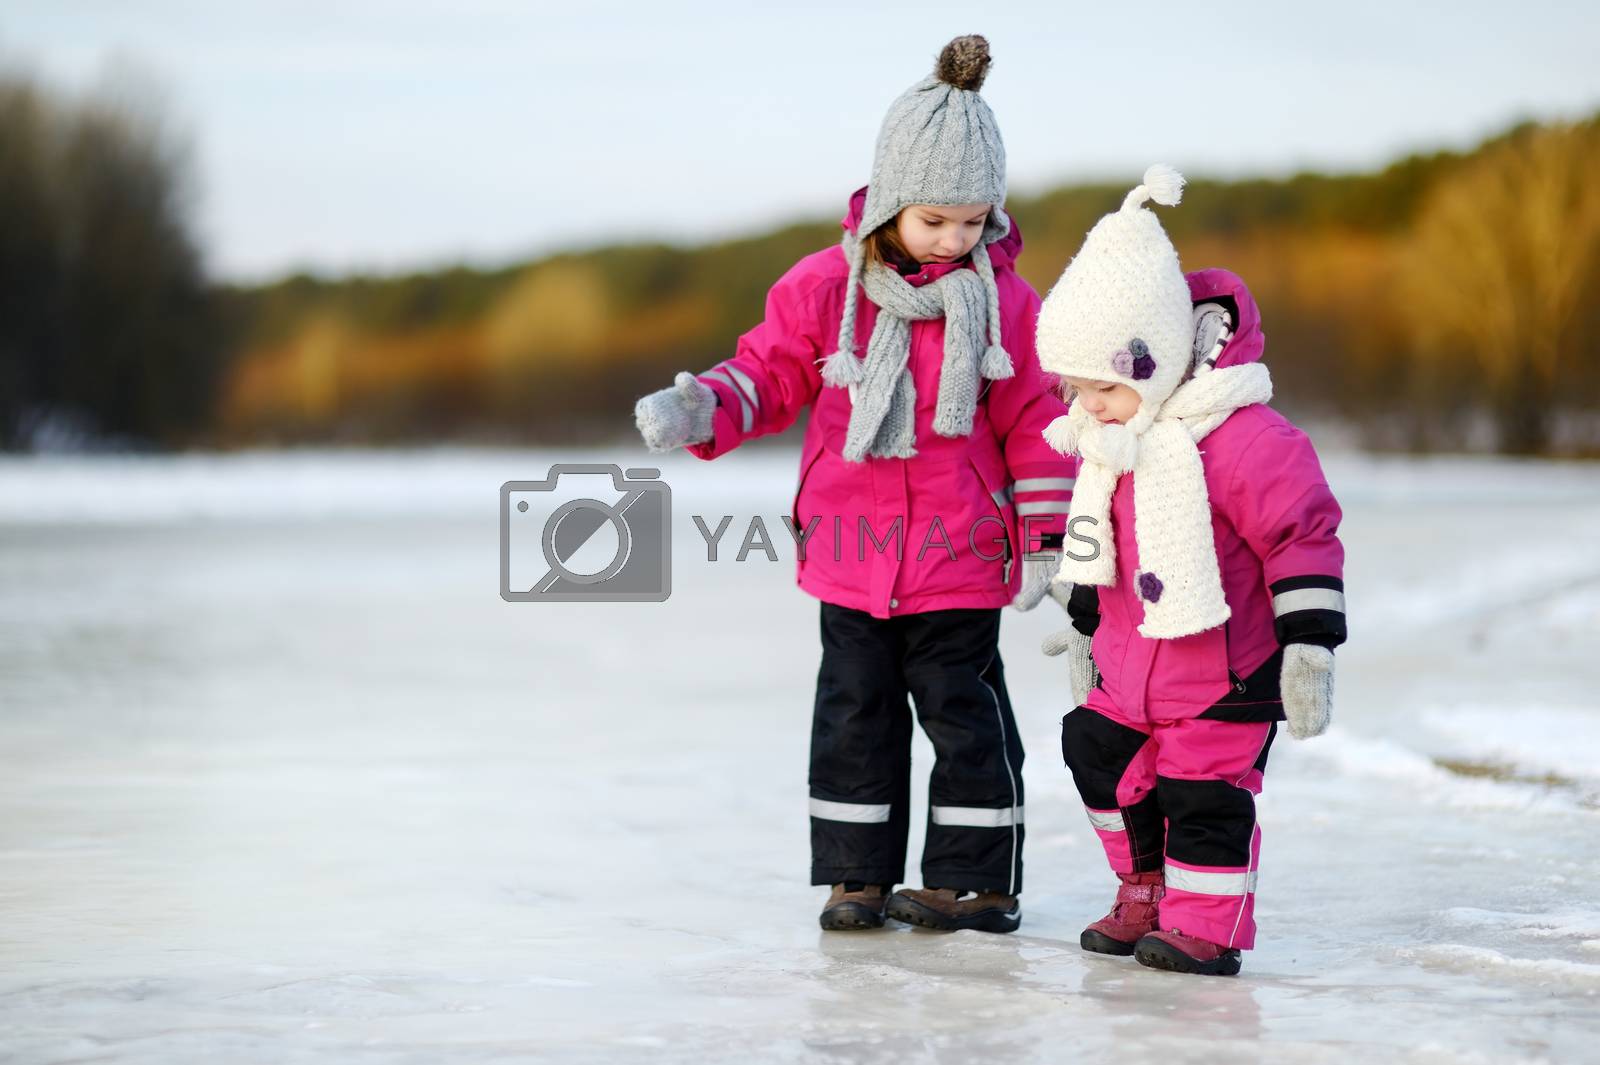 Royalty free image of Two little sisters having fun on snowy winter day by maximkabb